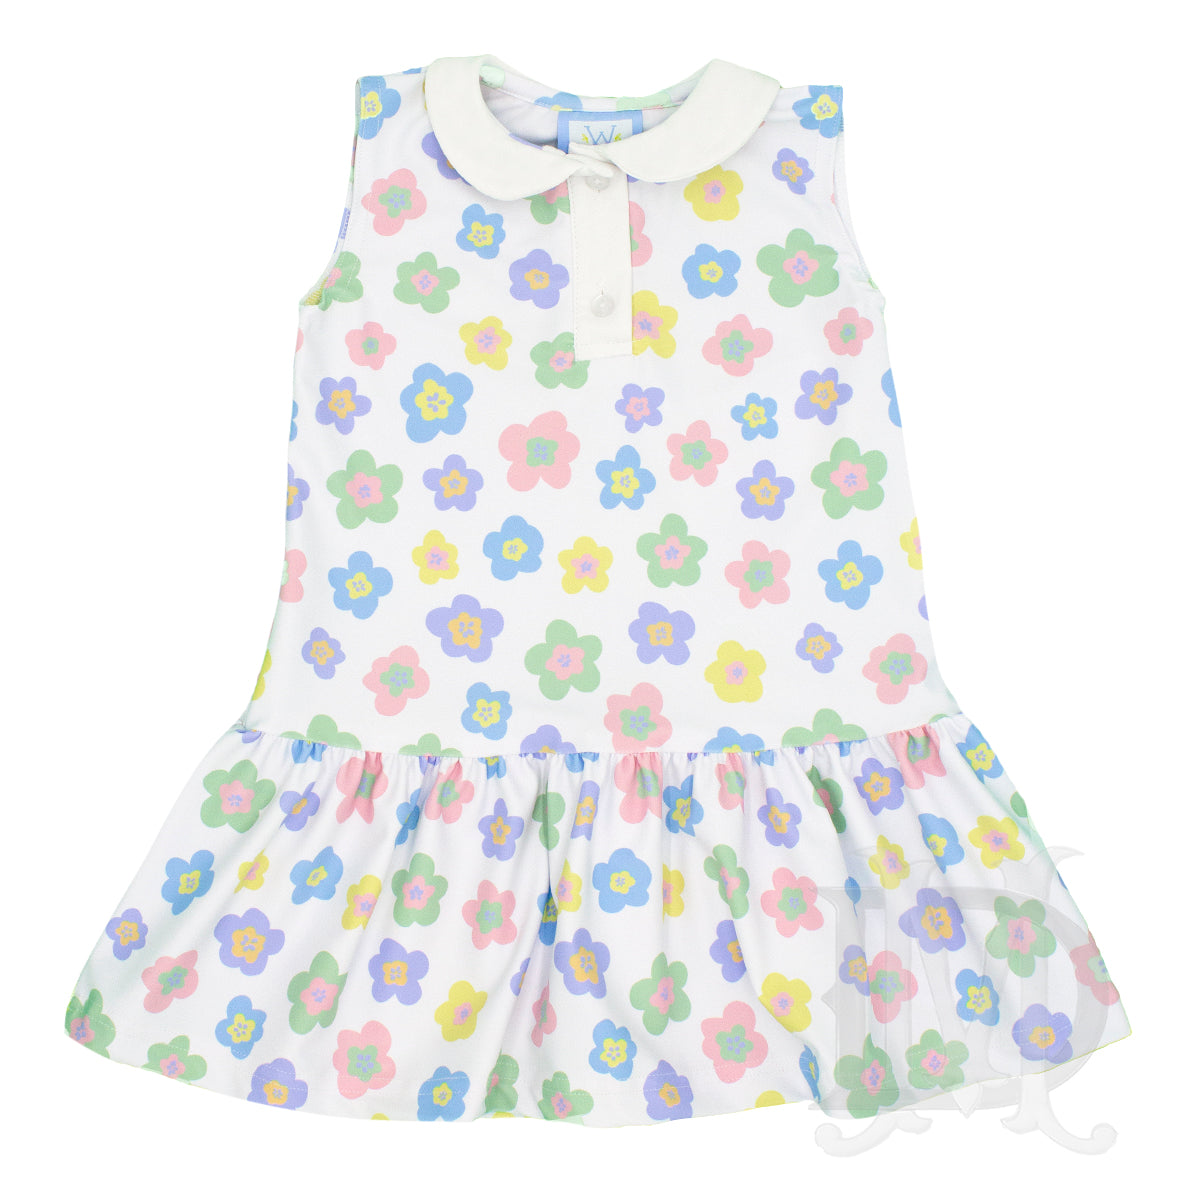 Multi Floral Little Girl's Athleisure Dress by Funtasia Too